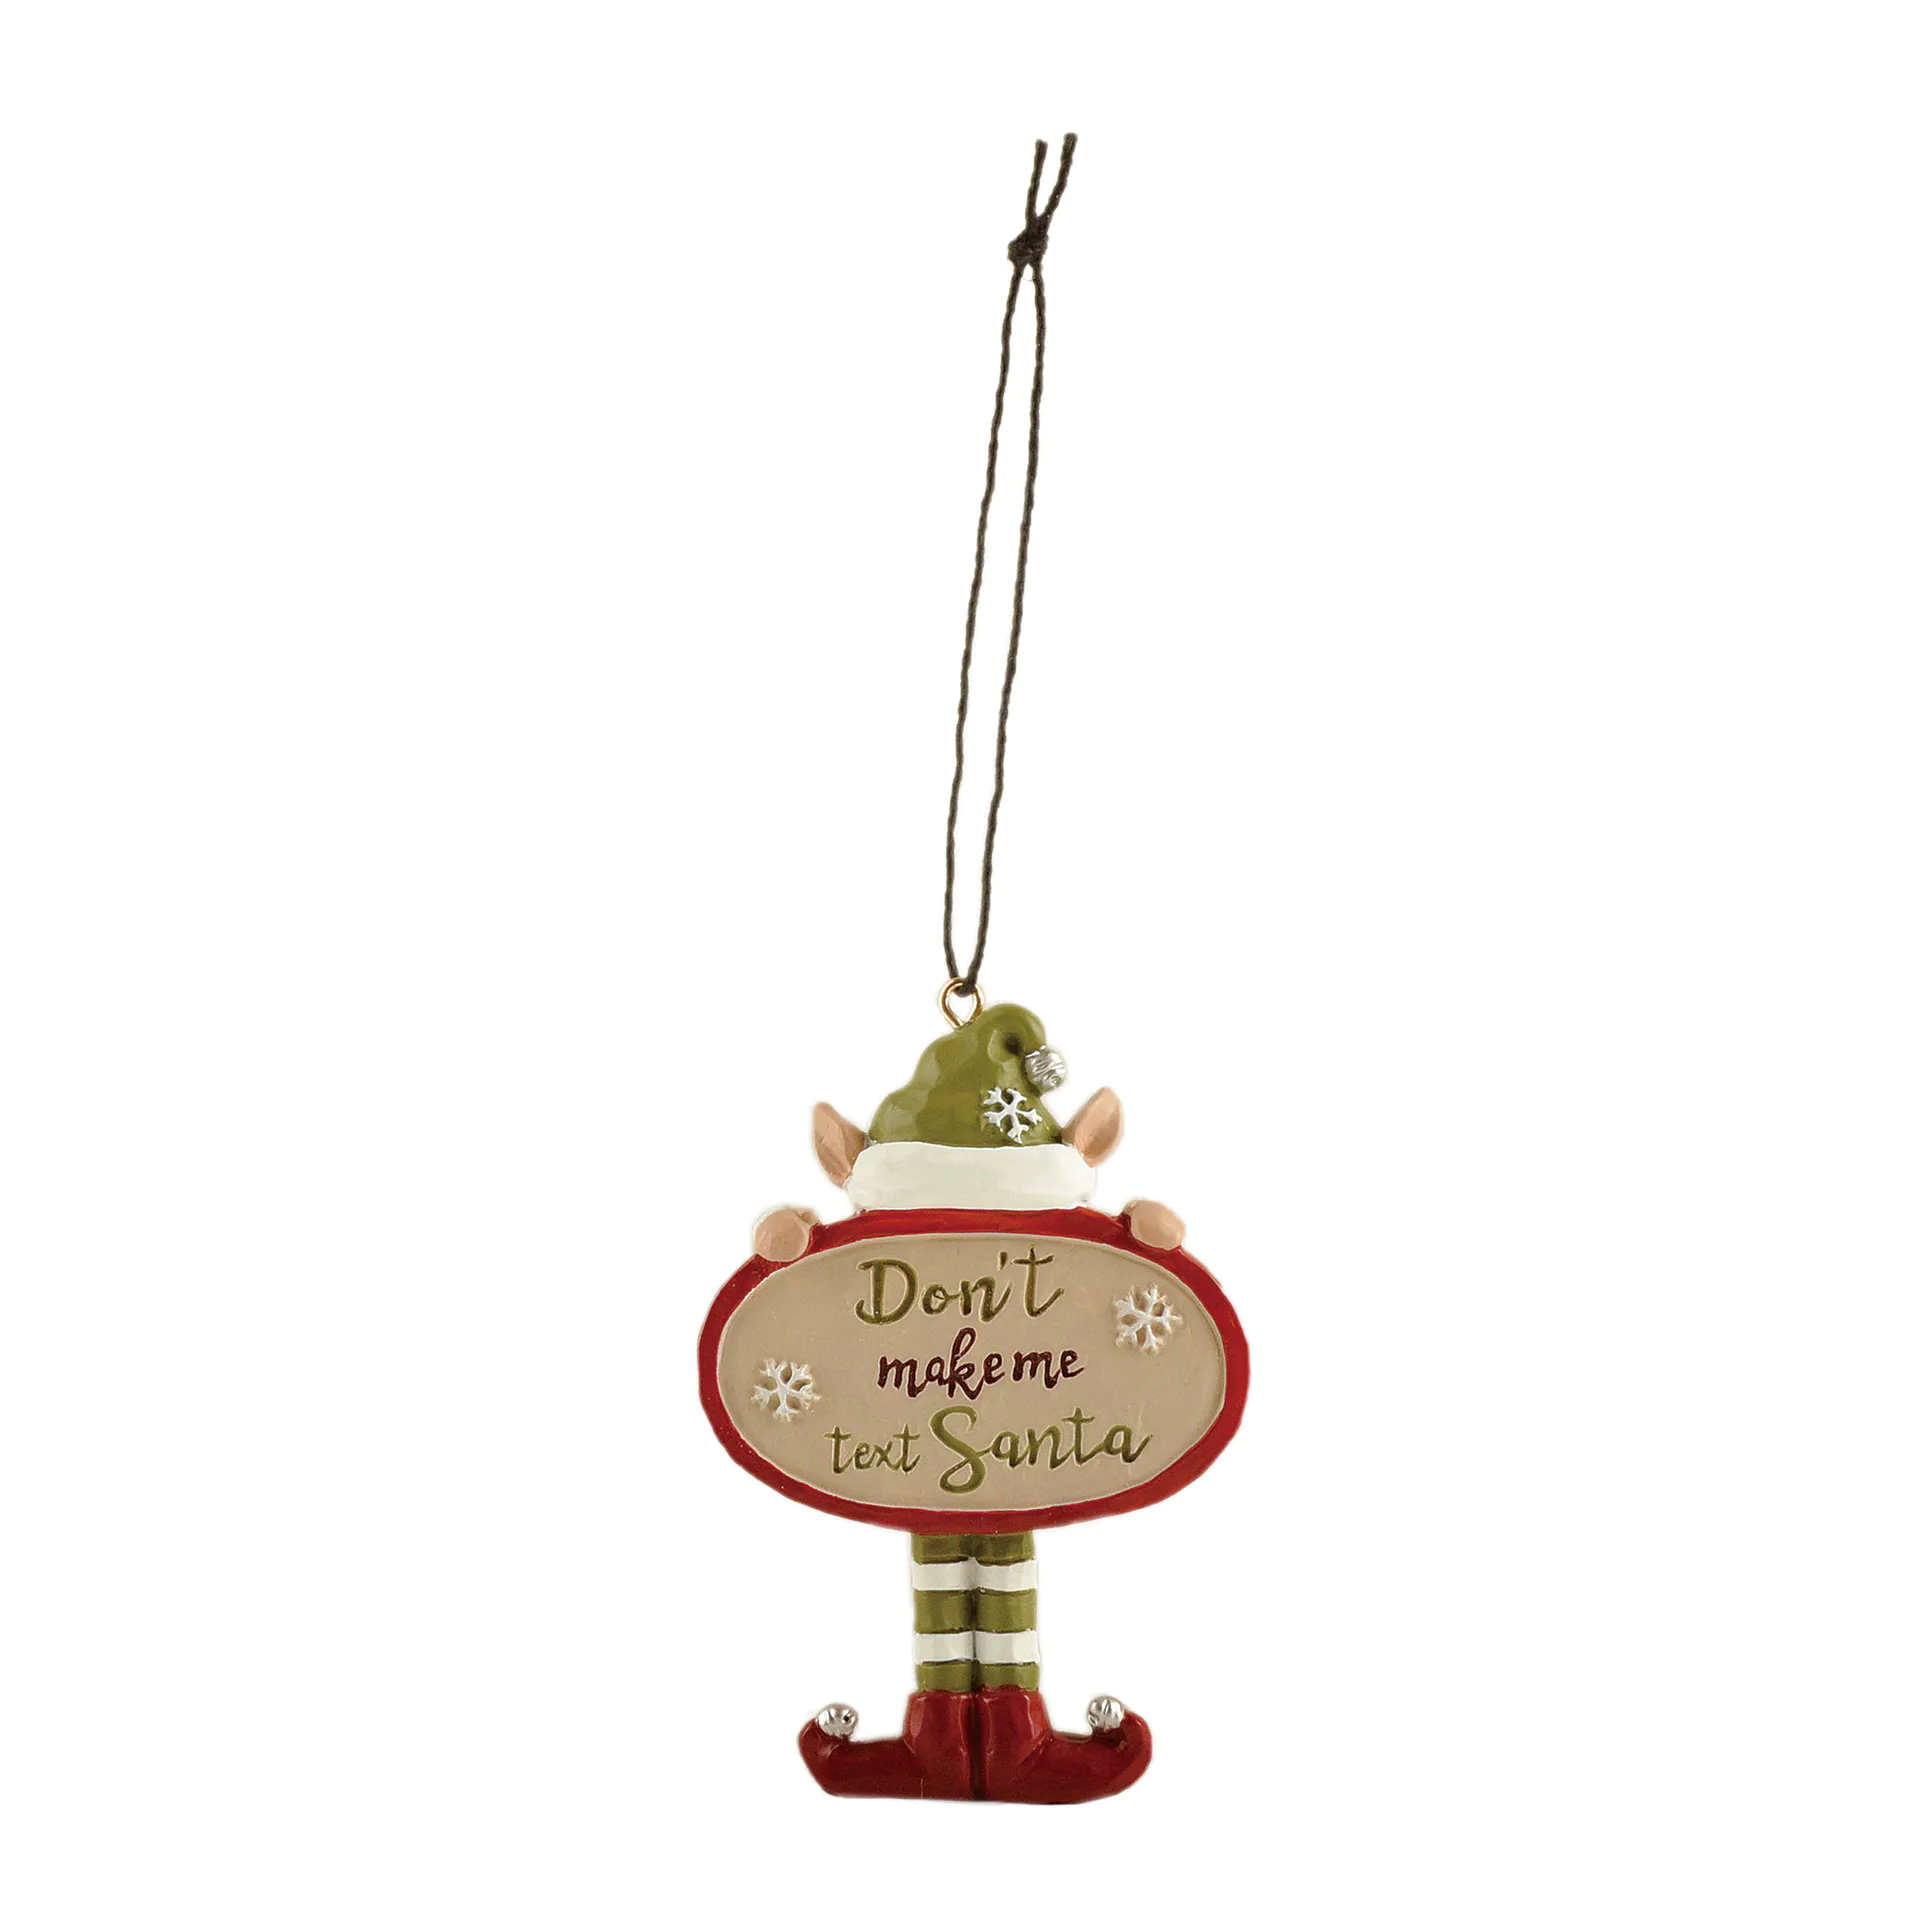 Playful Elf-Inspired 'Don't Make Me Text Santa' Ornament Christmas Decoration with Charming Striped Legs and Snowflake Detail for Gift 238-52147